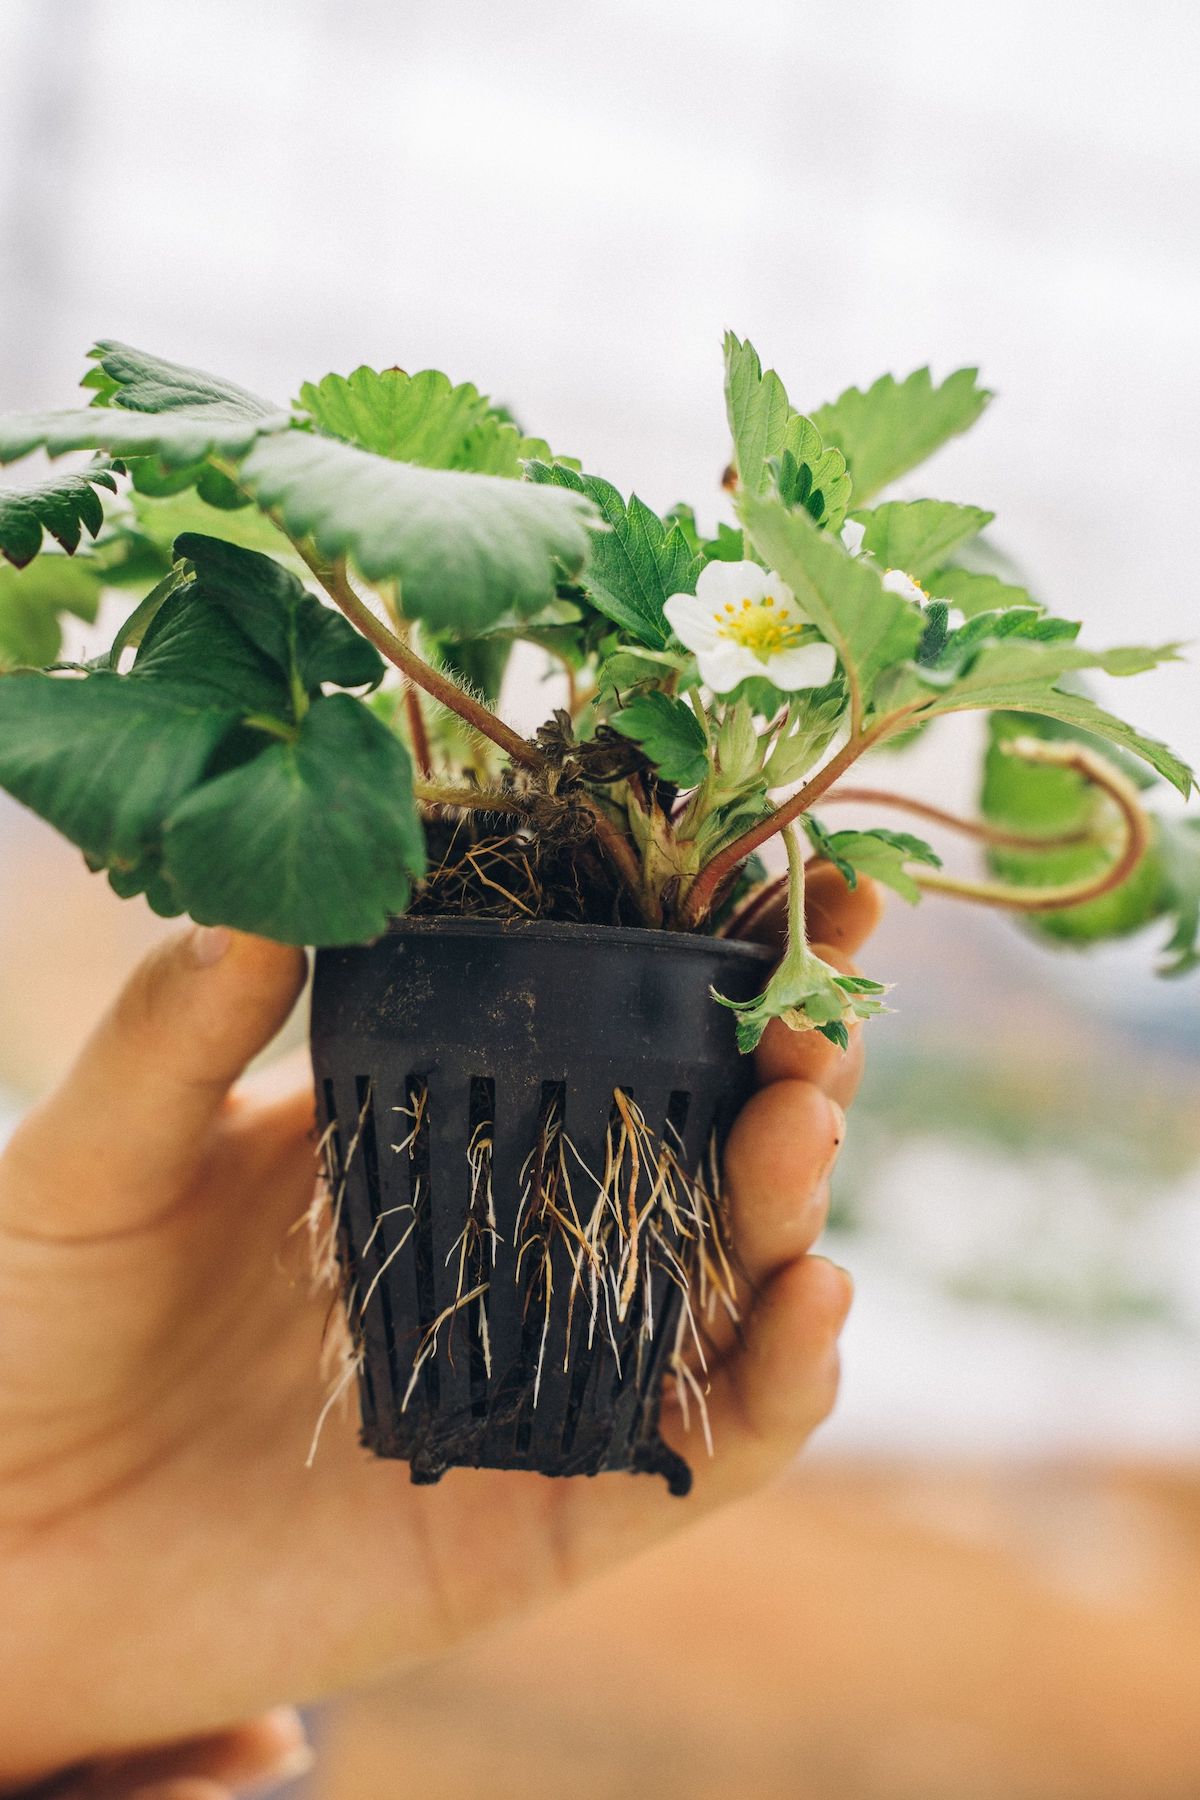 Strawberry Plant on a Black Container